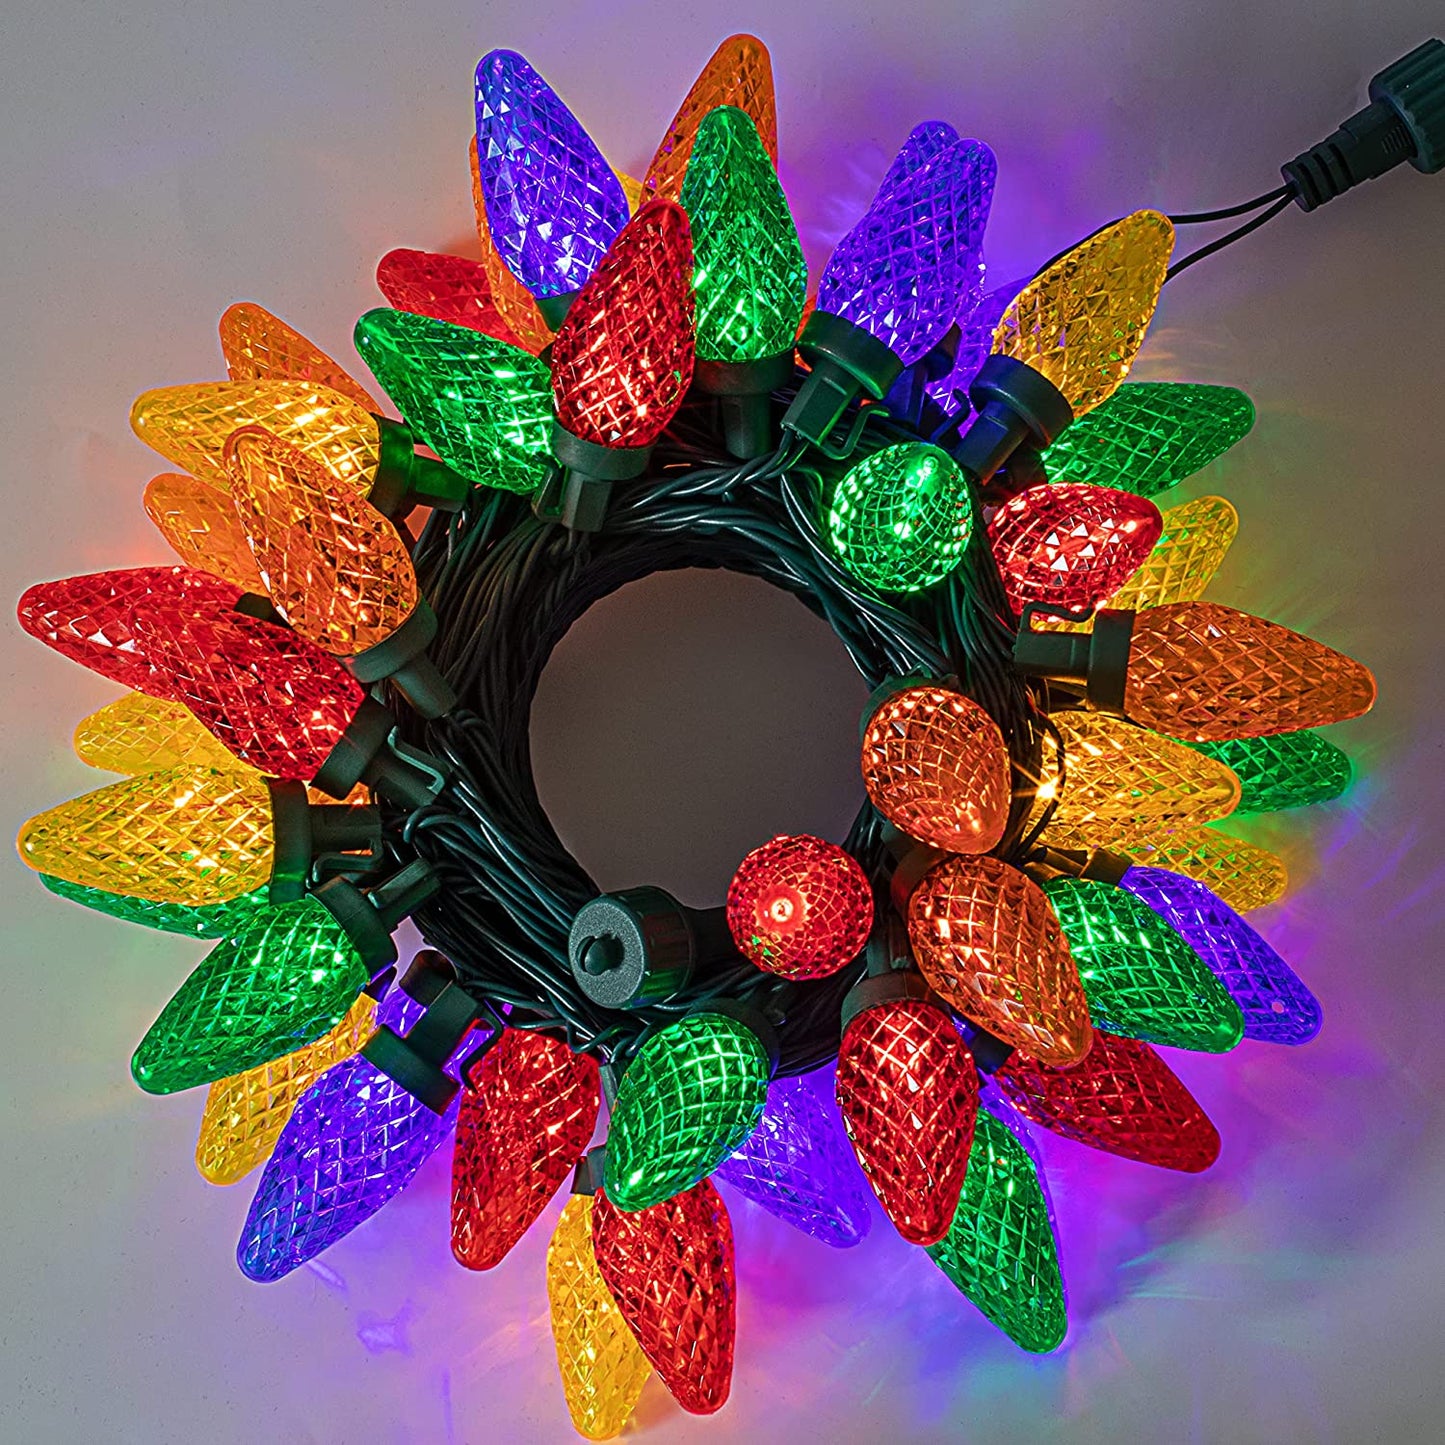 50 Count Christmas Multicolor LED String Lights